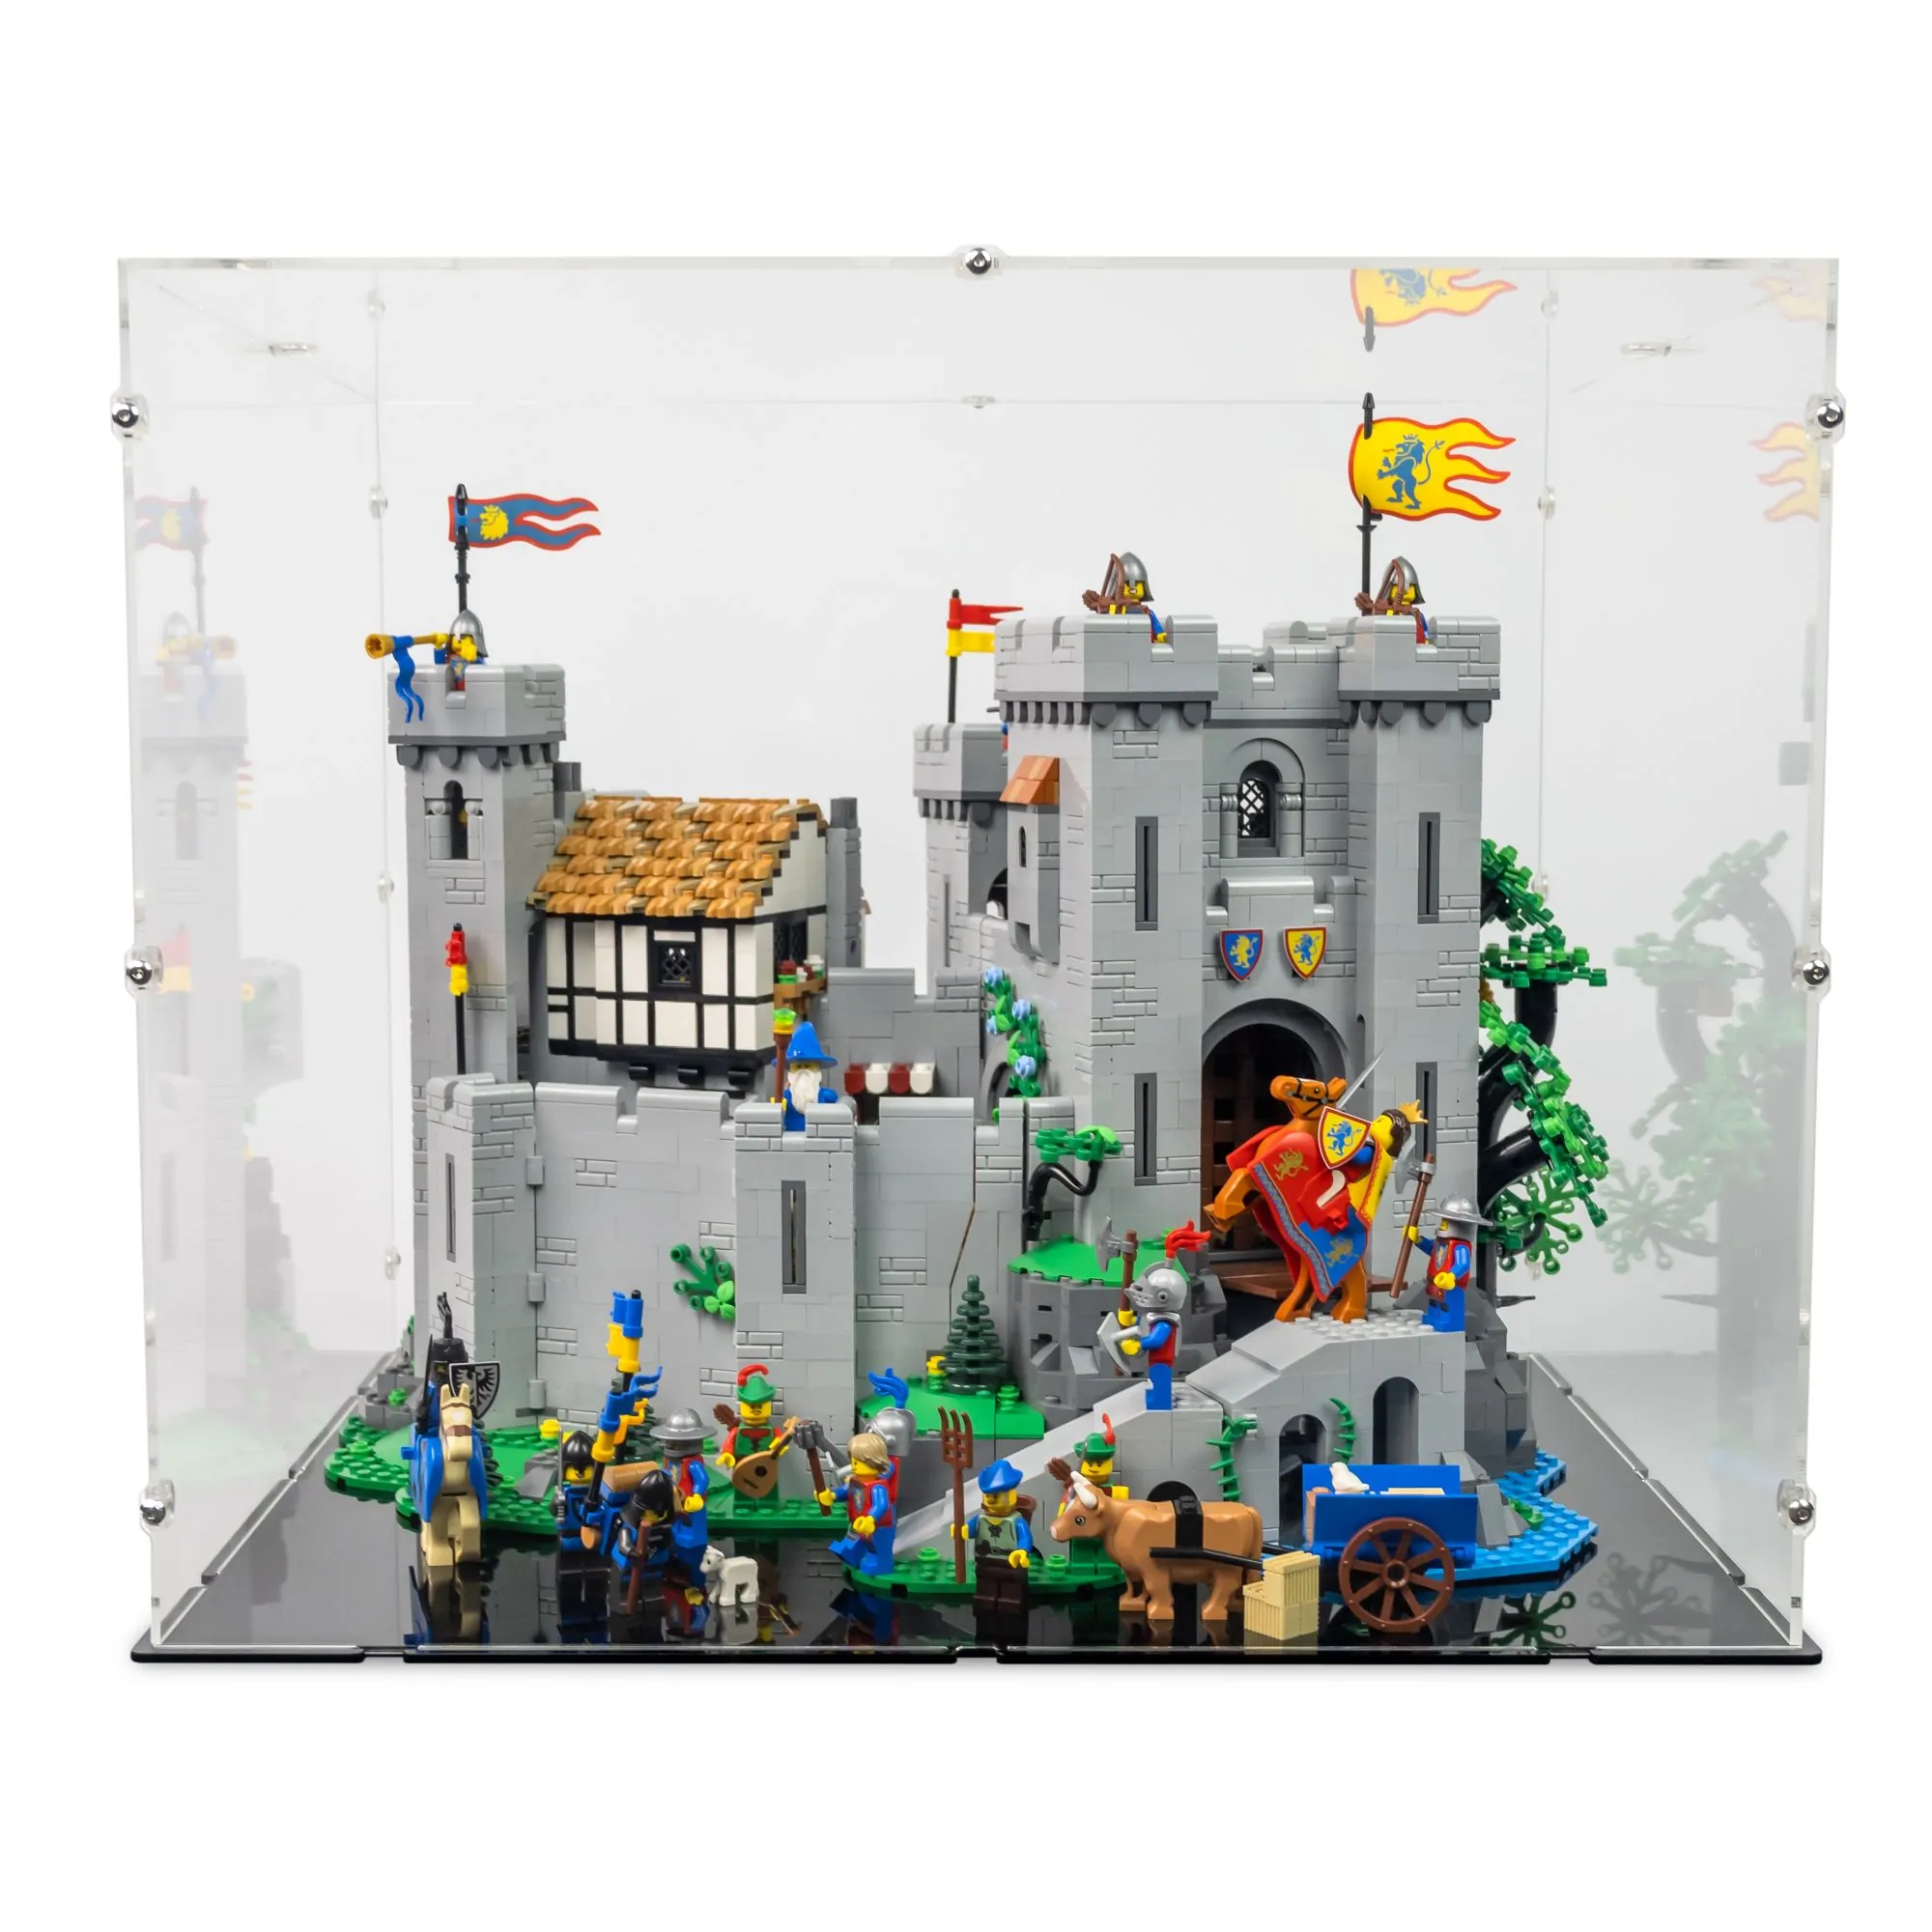 https://www.idisplayit.com/images/detailed/87/lego-lion-knights-castle-square-display-box-04-1.webp